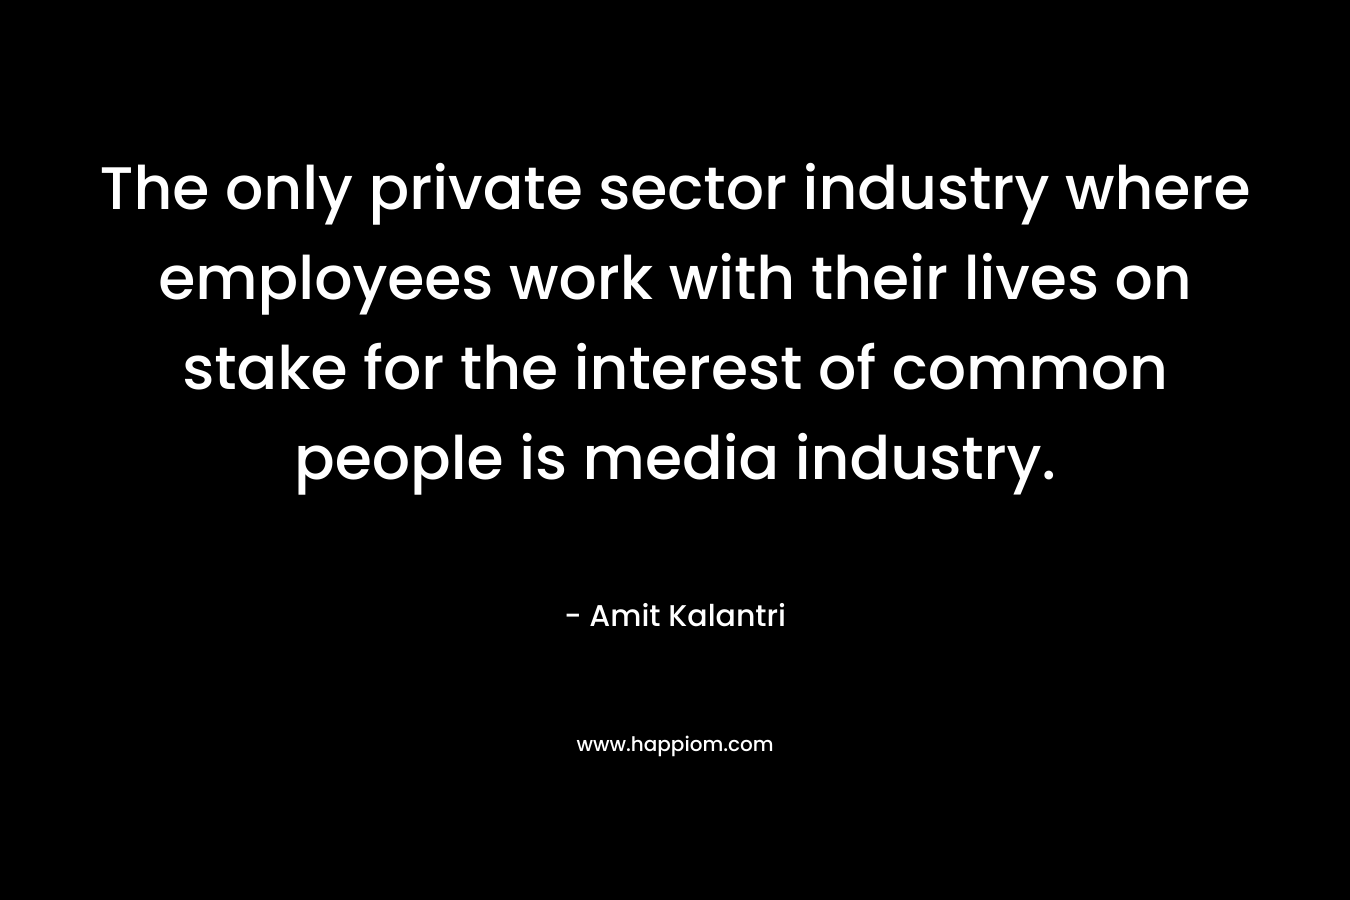 The only private sector industry where employees work with their lives on stake for the interest of common people is media industry.